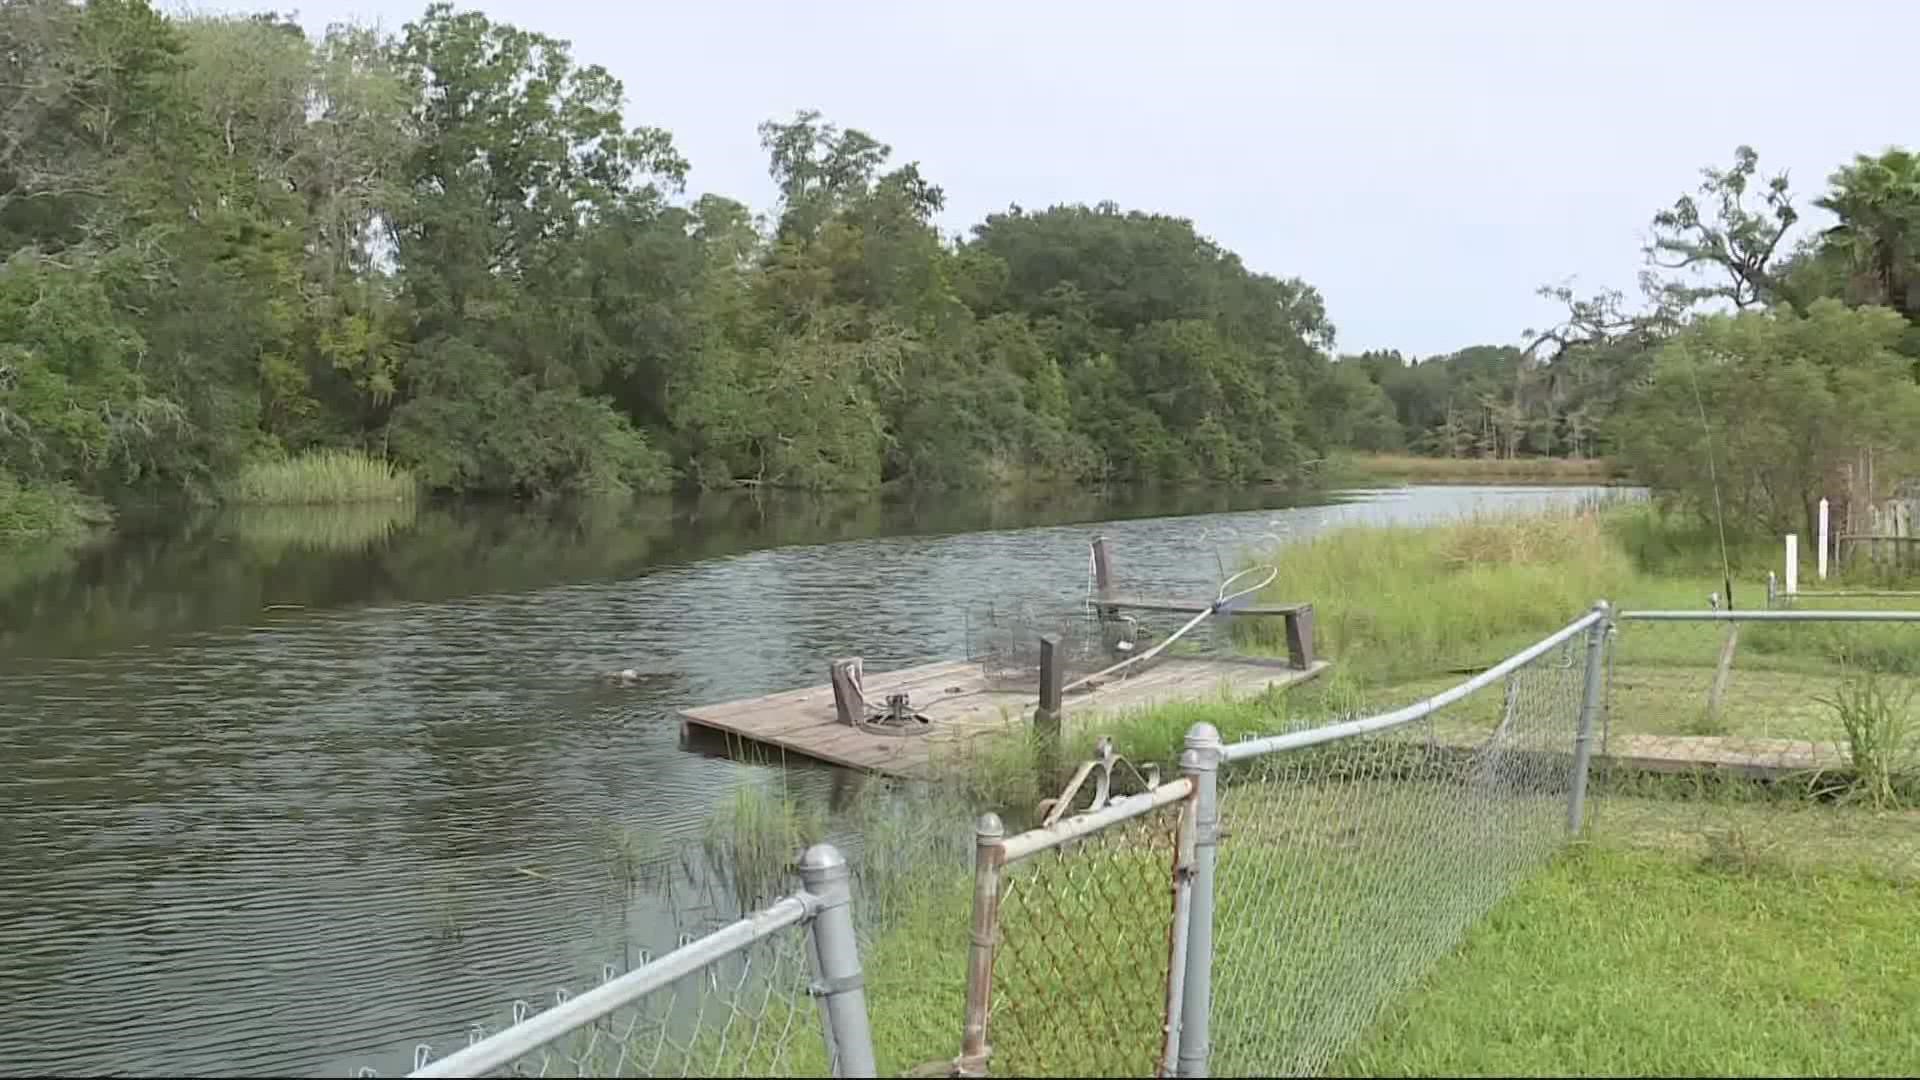 With the area prone to flooding due to the Ribault River, they're taking precautions to minimize damage.